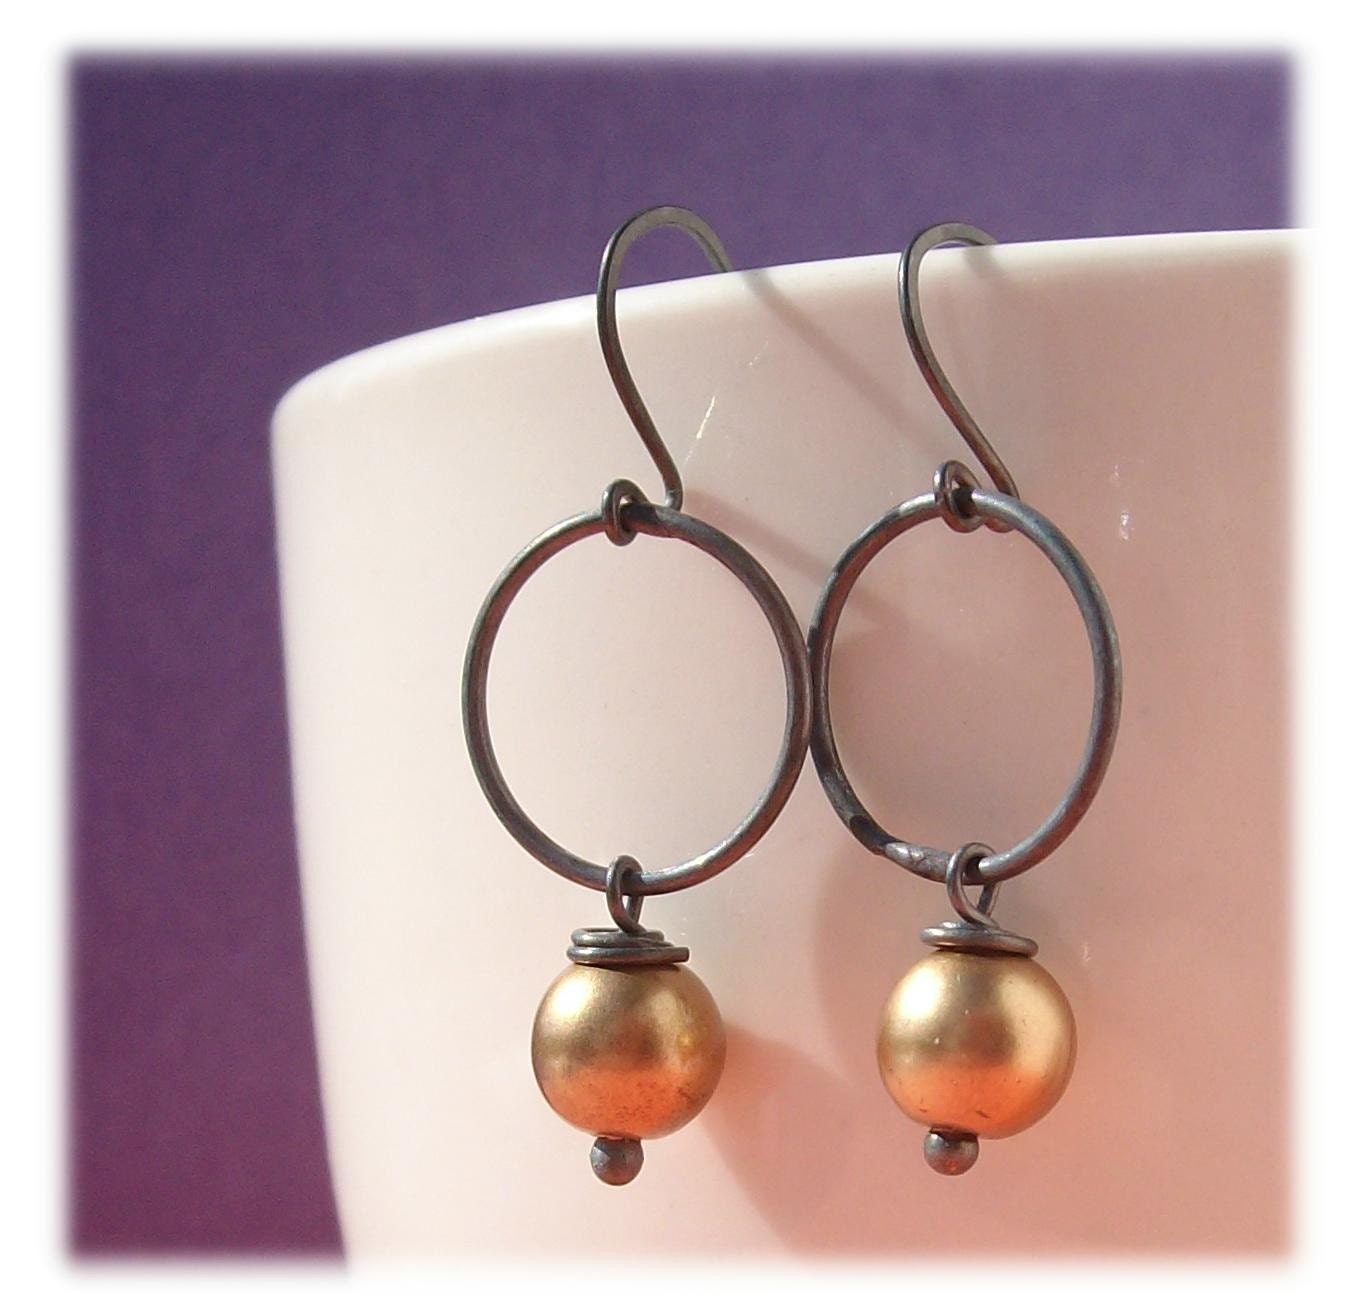 handmade sterling silver hoop earrings gold vintage bead pawandclawdesigns paw claw designs